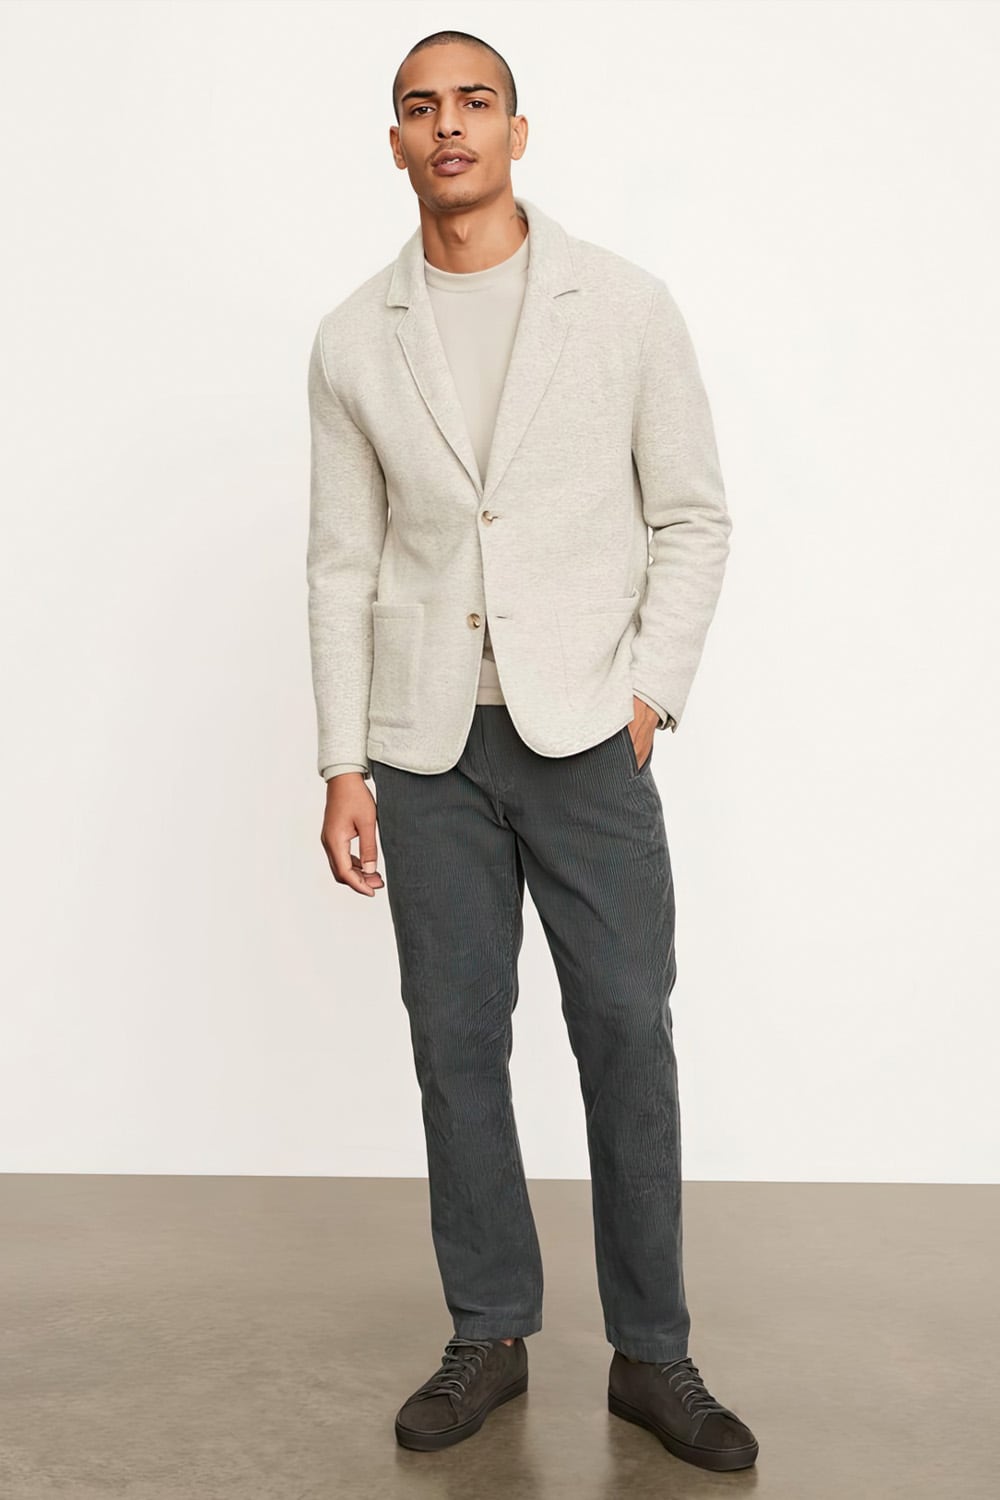 How To Wear A Blazer With Chinos: 18 Outfits That Get It Right